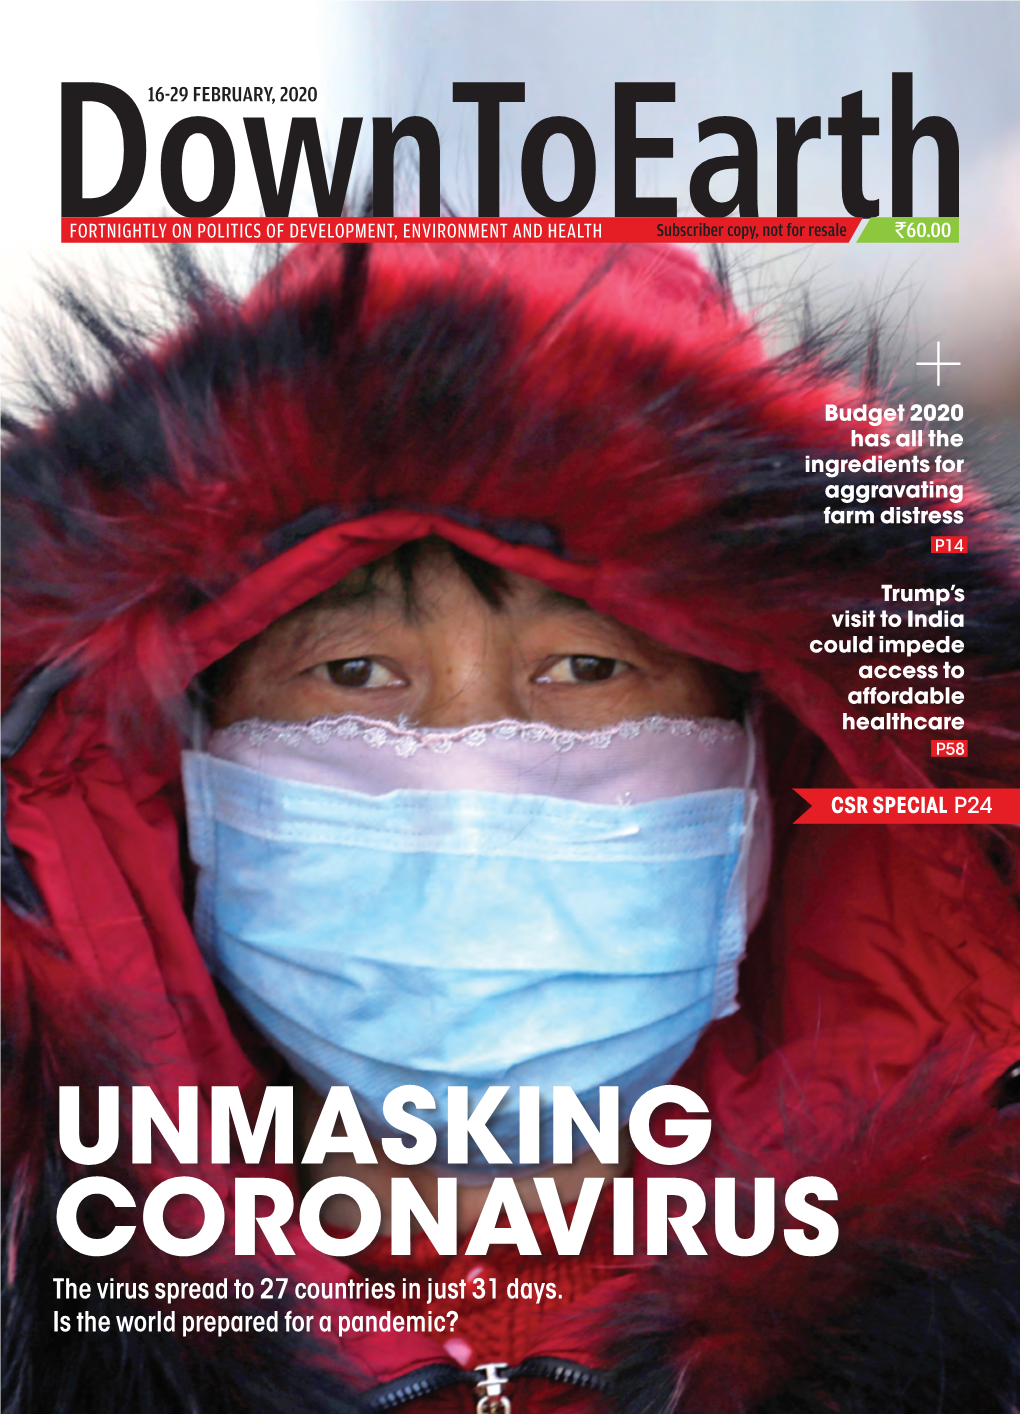 UNMASKING CORONAVIRUS the Virus Spread to 27 Countries in Just 31 Days